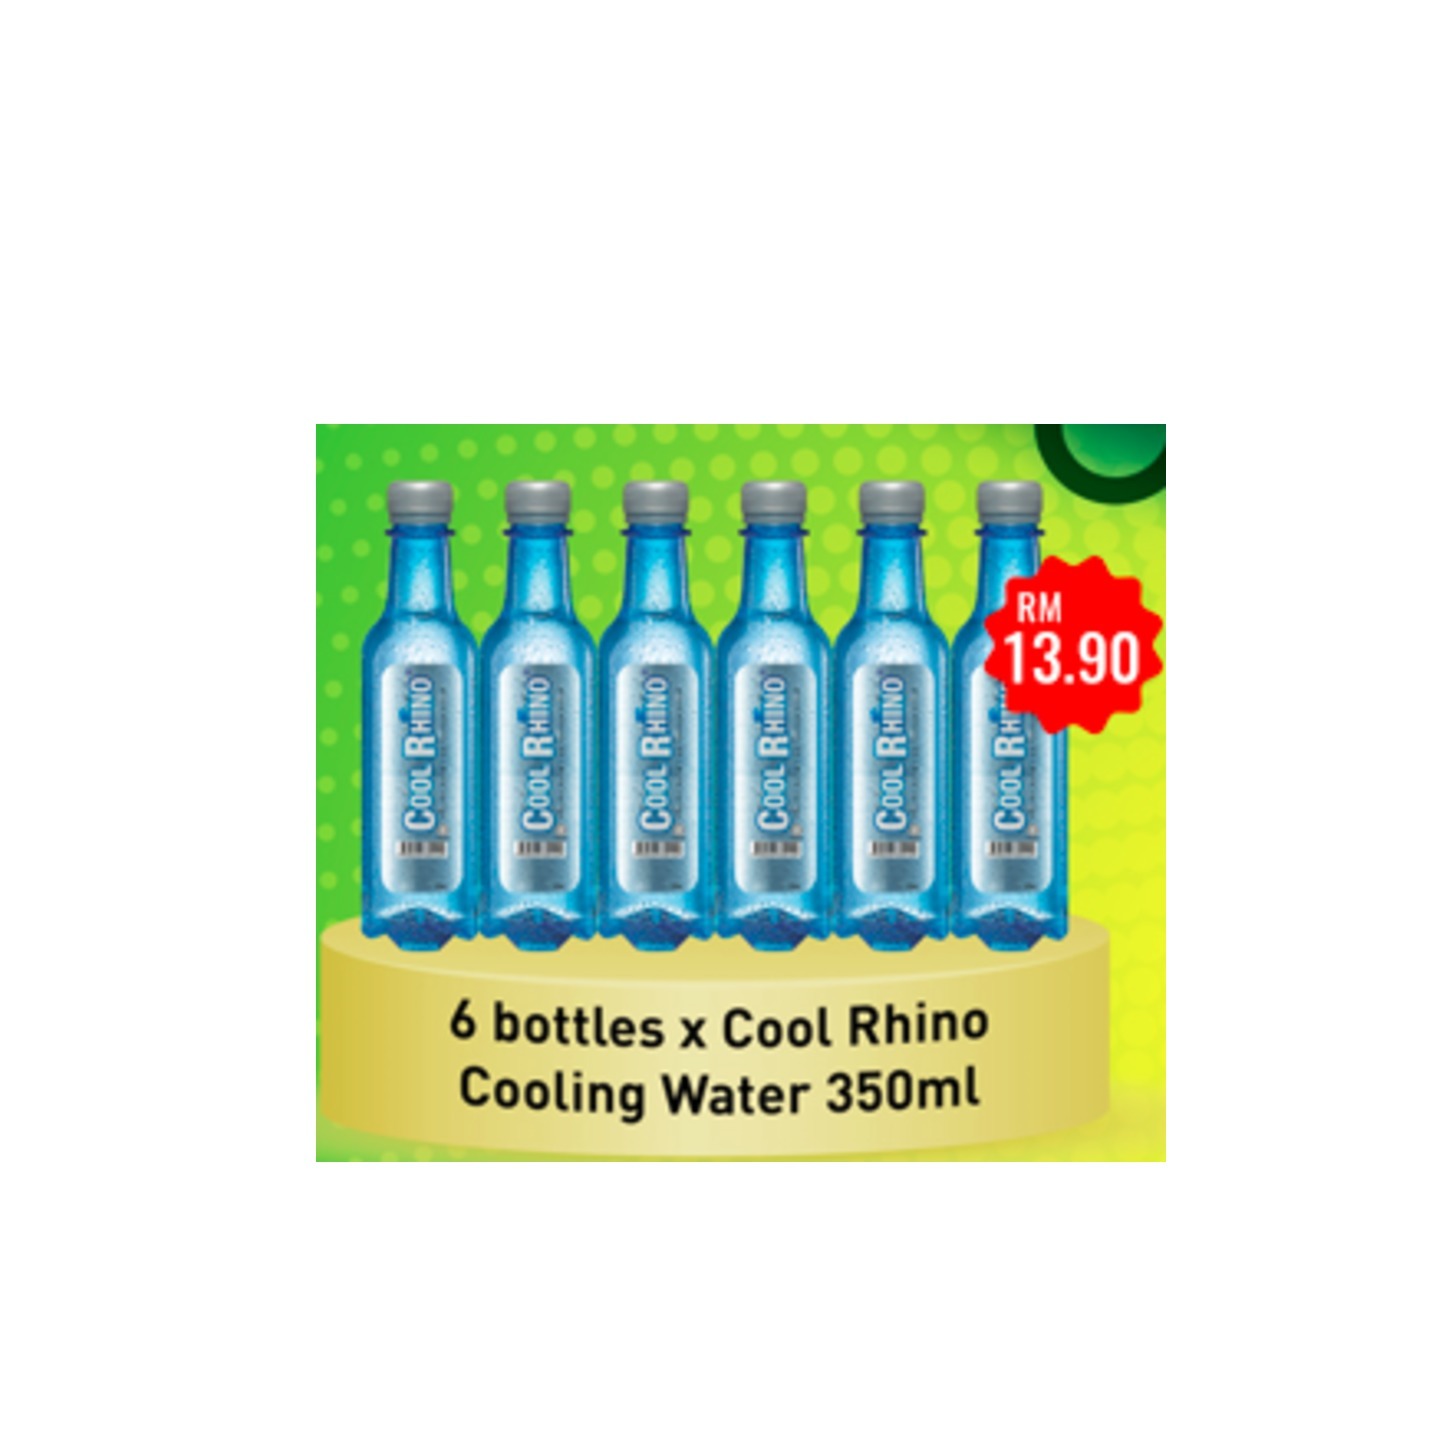 PACKAGE 1 : COOL RHINO COOLING WATER 350ML x 6